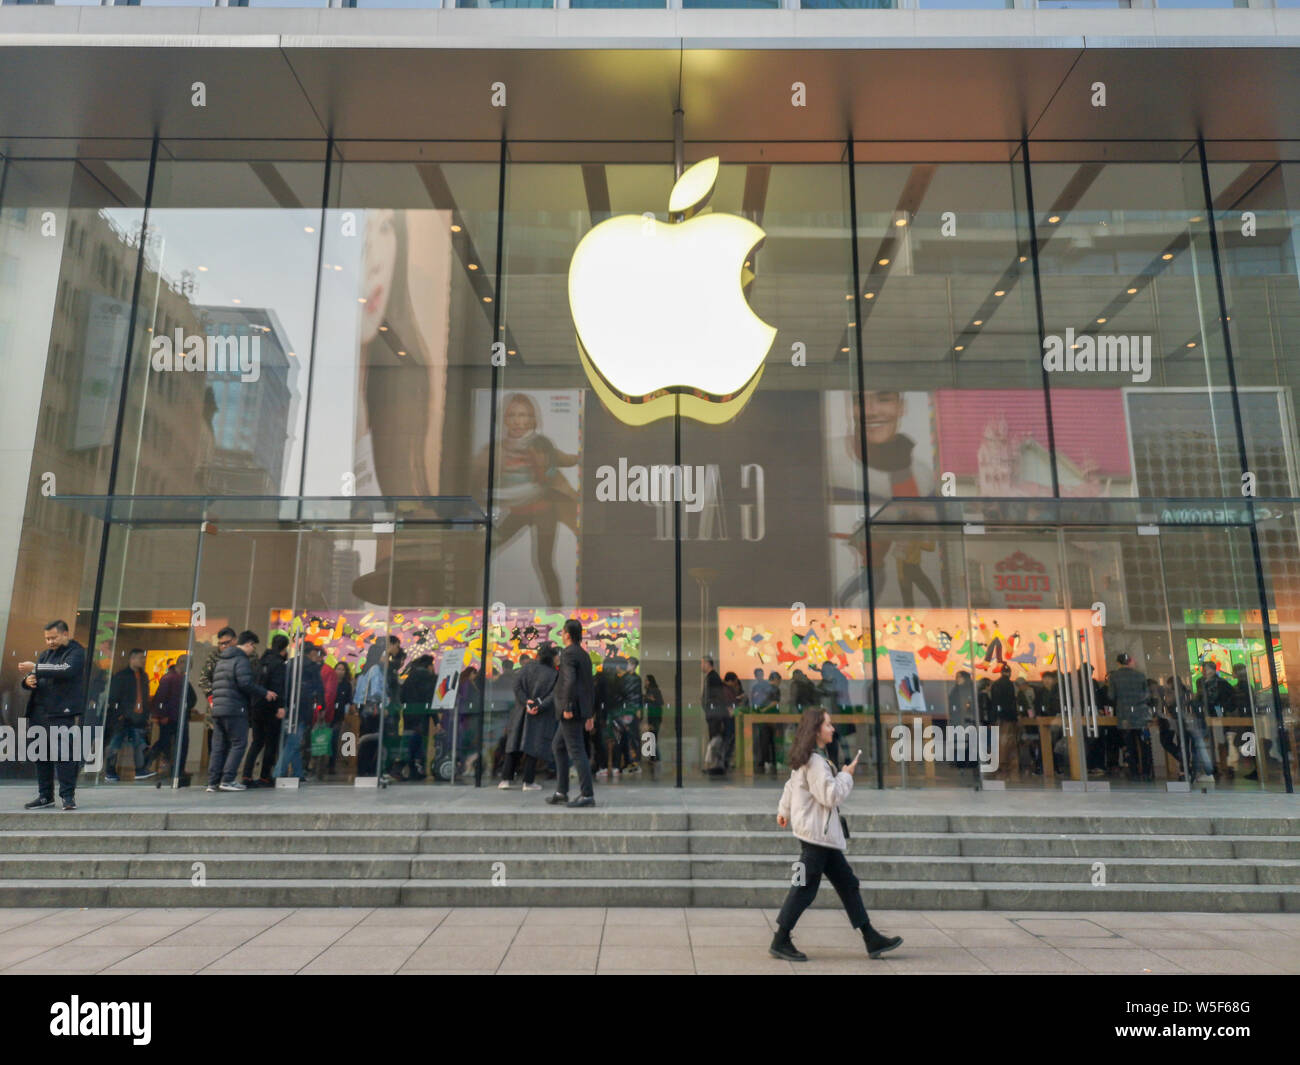 File View Of An Apple Store In Shanghai China 4 March 2019